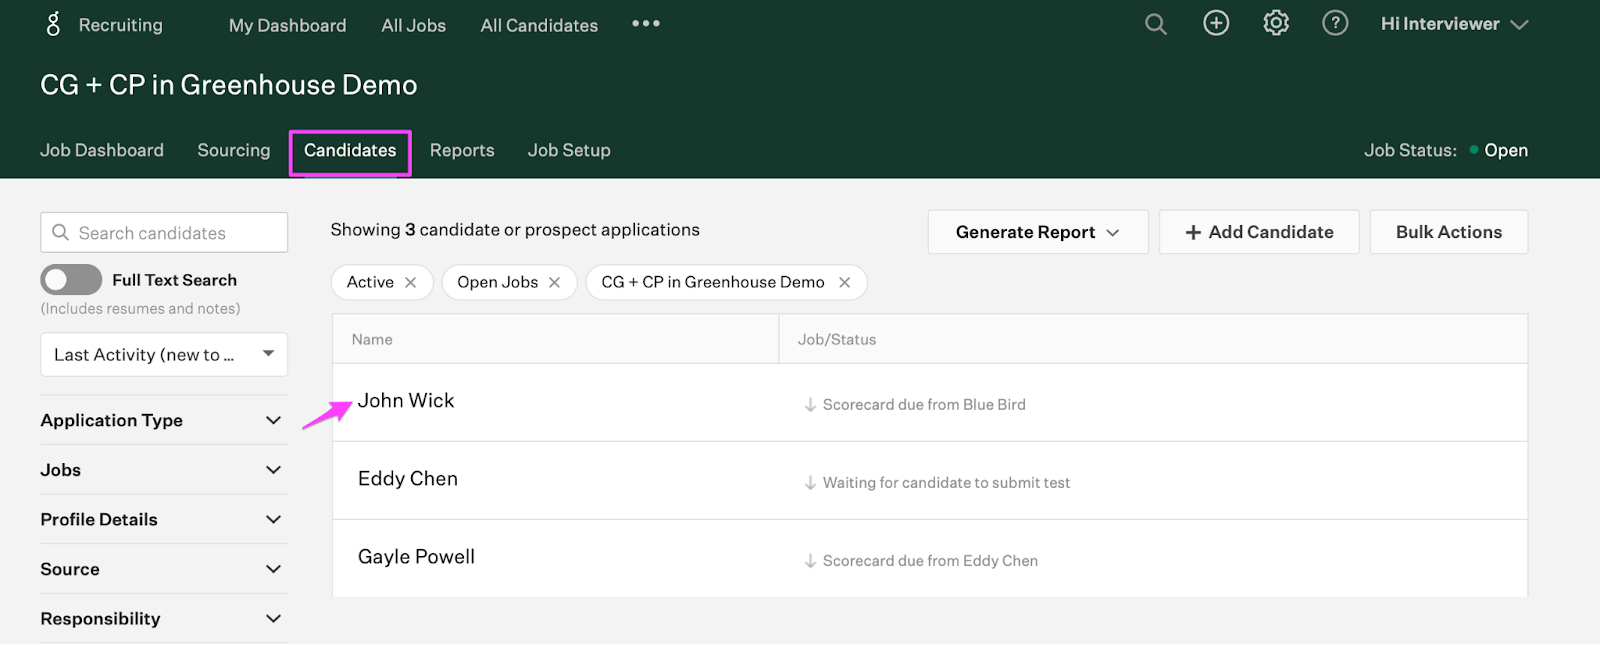 On the job page the candidates tab is highlighted and an arrow points to a candidate's name.